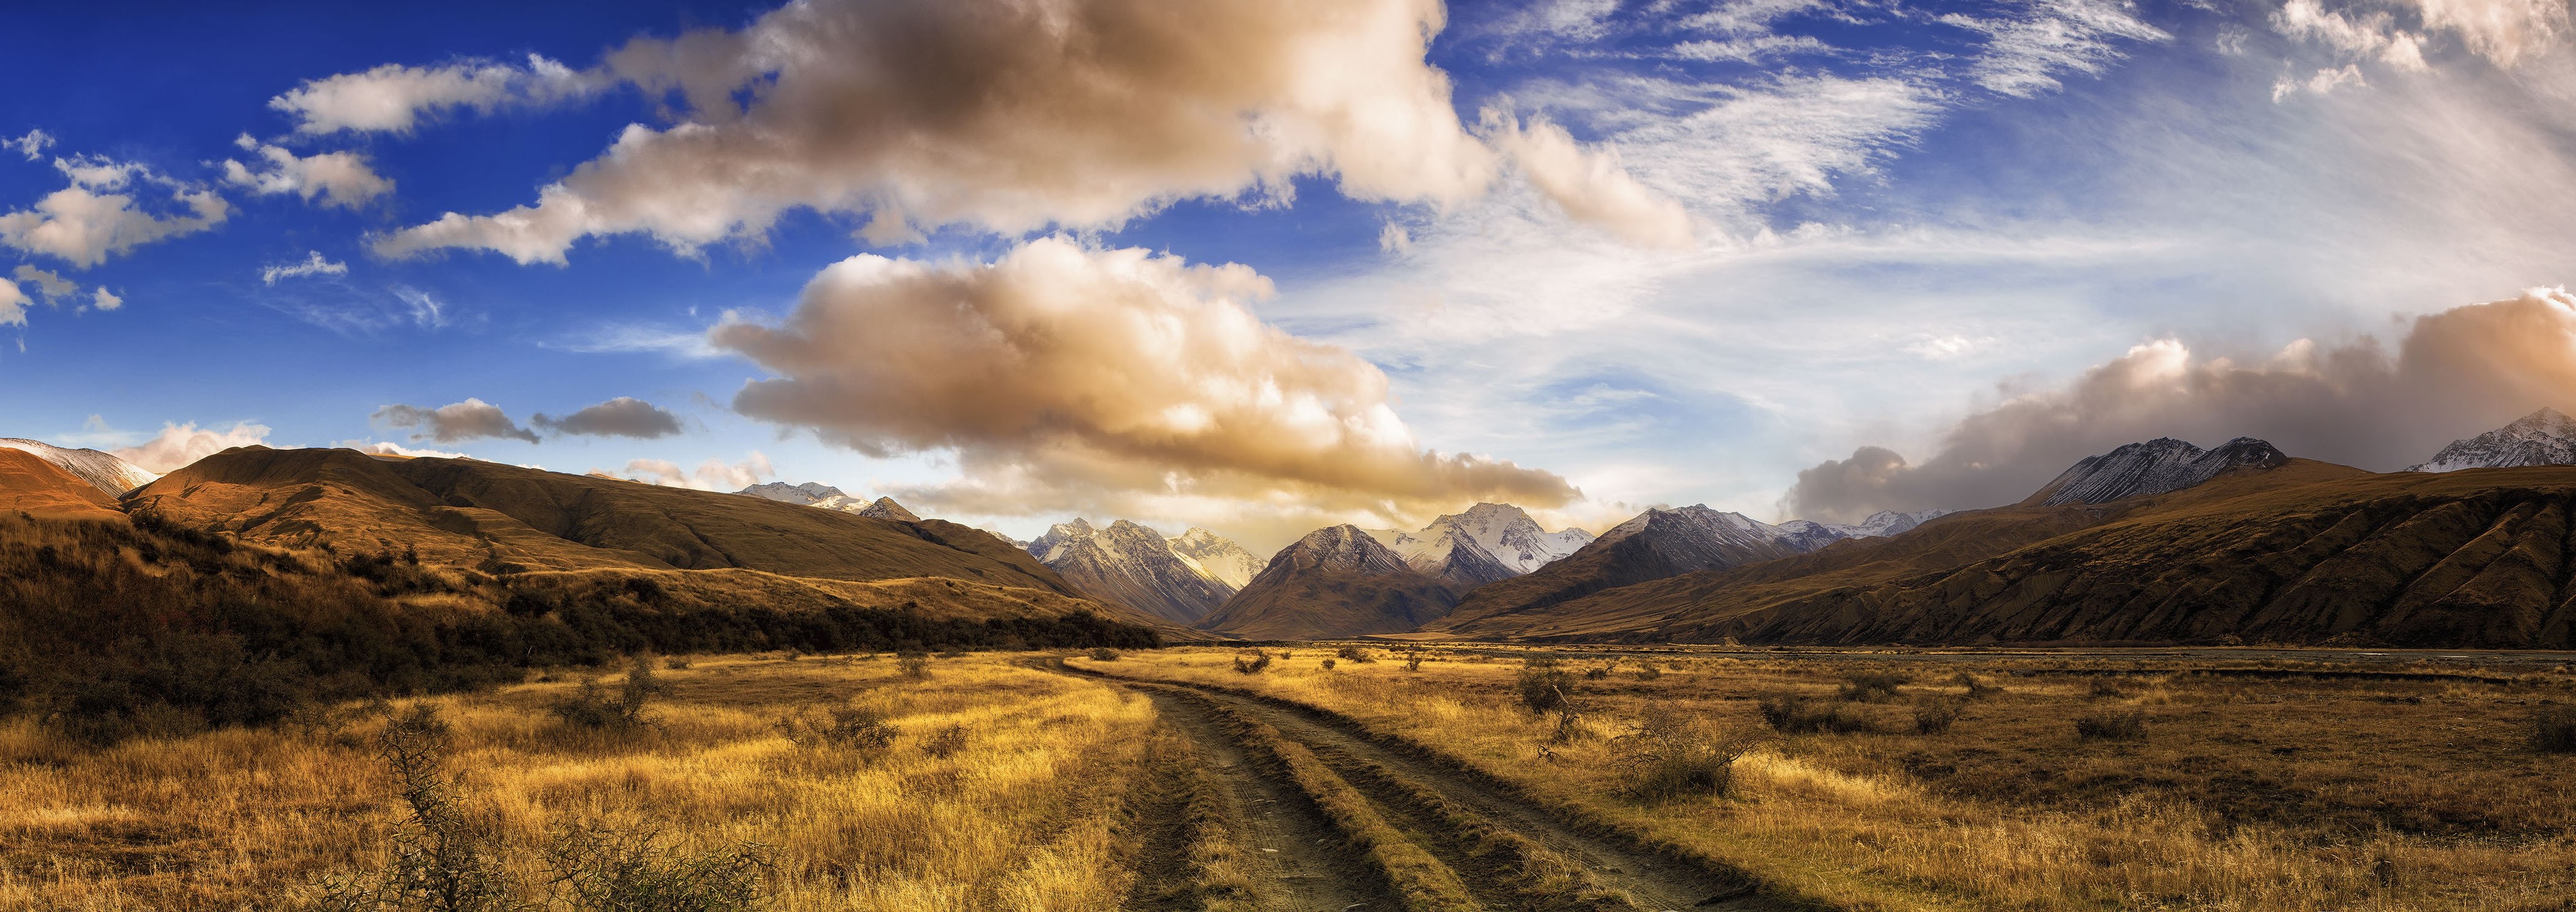 Snowy Peak, New Zealand Wallpapers Hd / Desktop And - Dirt Road With Mountain Background - HD Wallpaper 